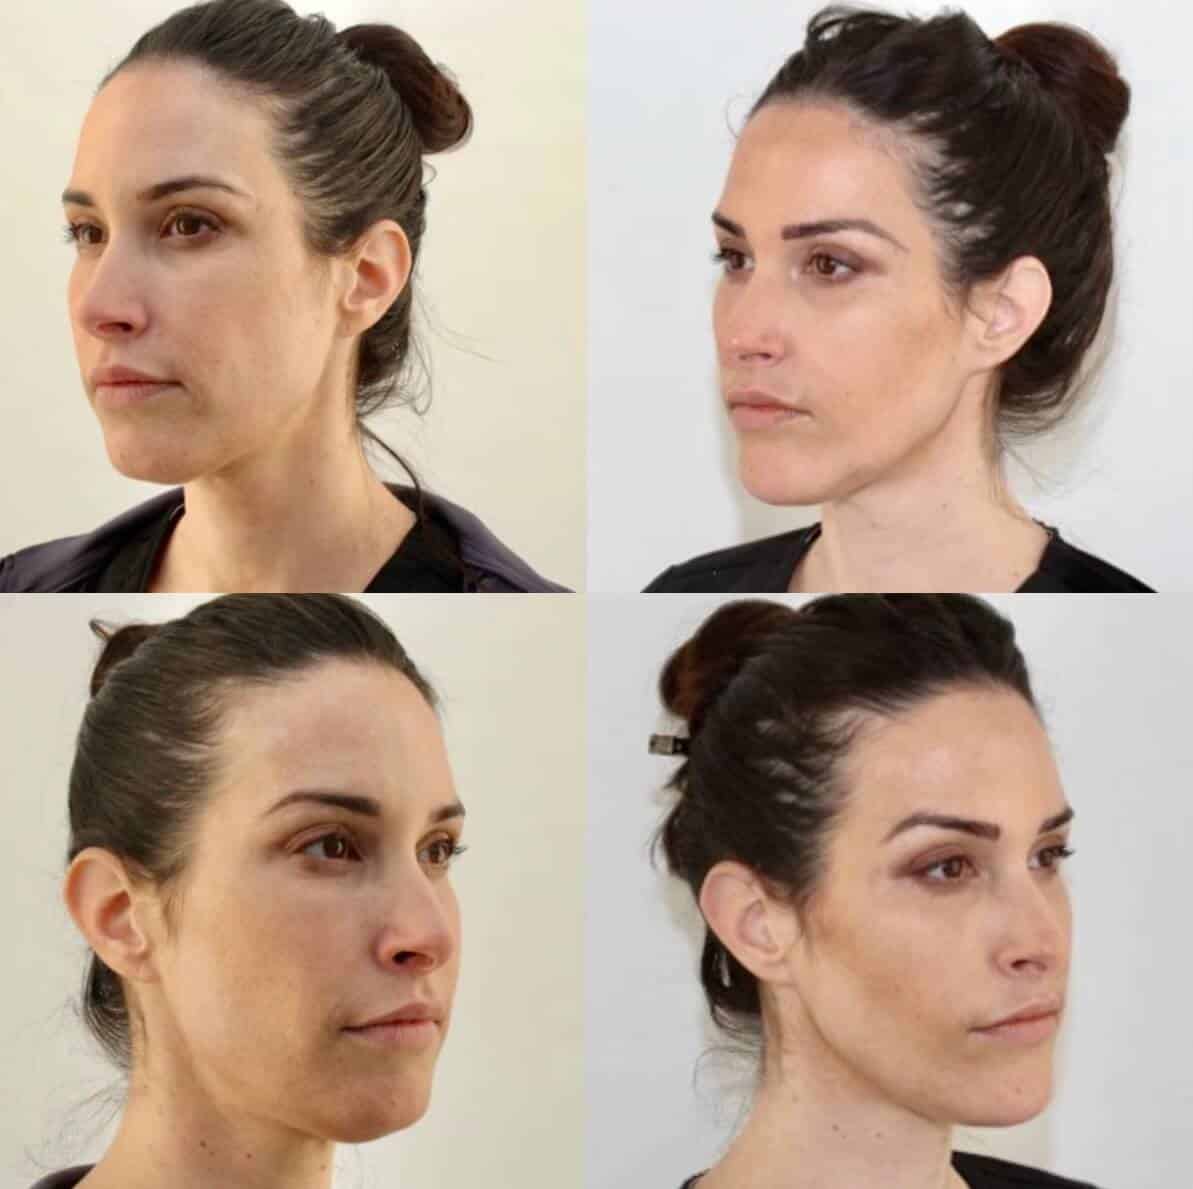 Before and After of FaceTite Patient in NYC